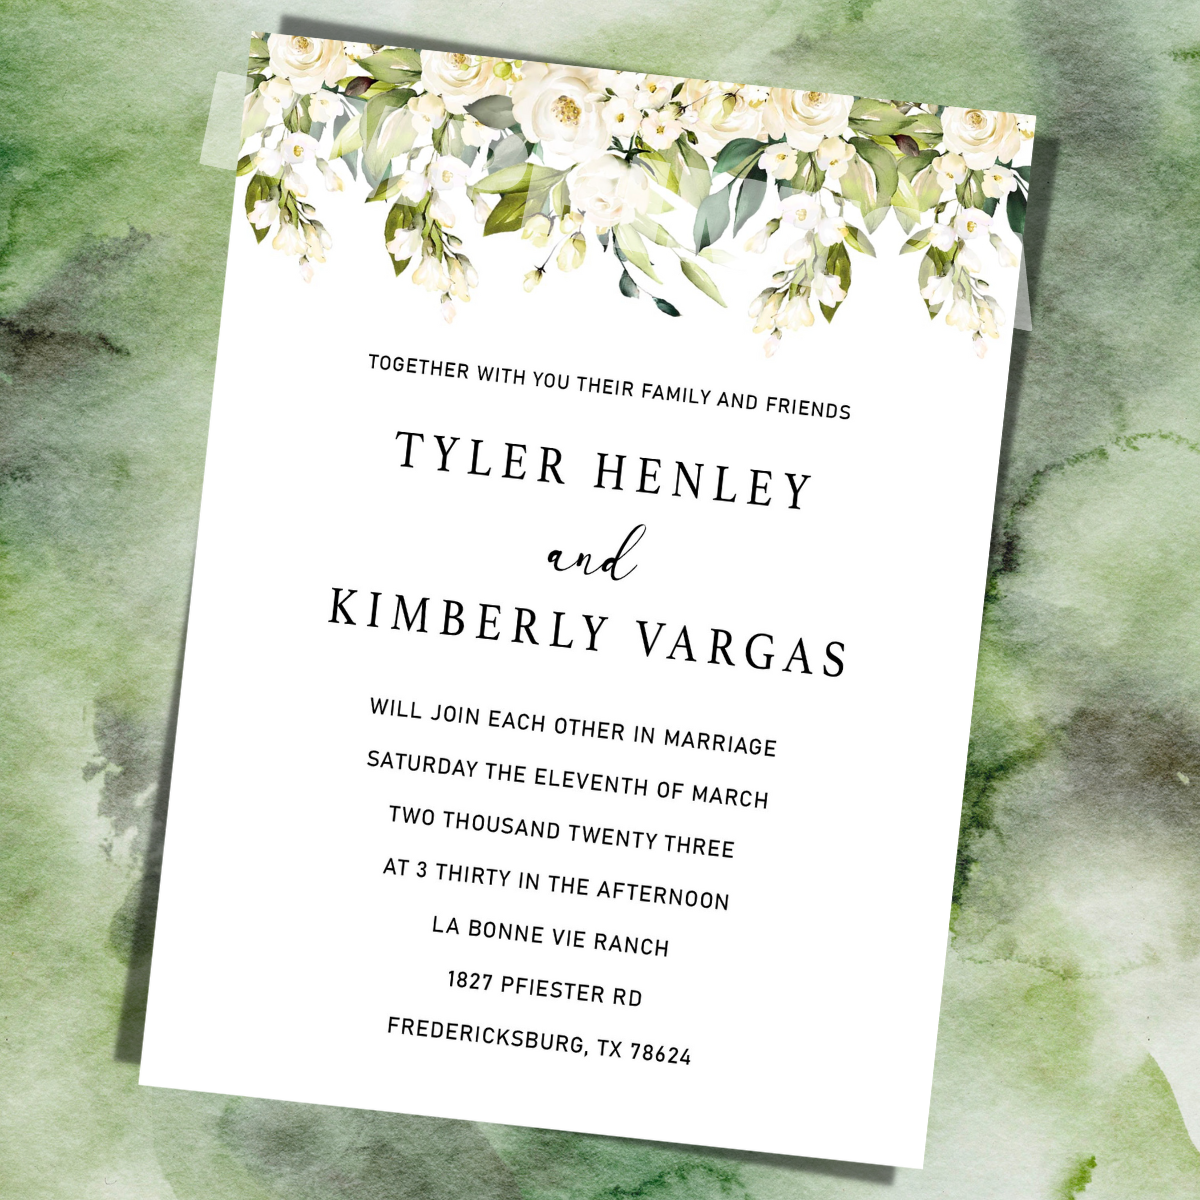 Floral With Greenery Wedding Invitations 5 x 7 Cardstock